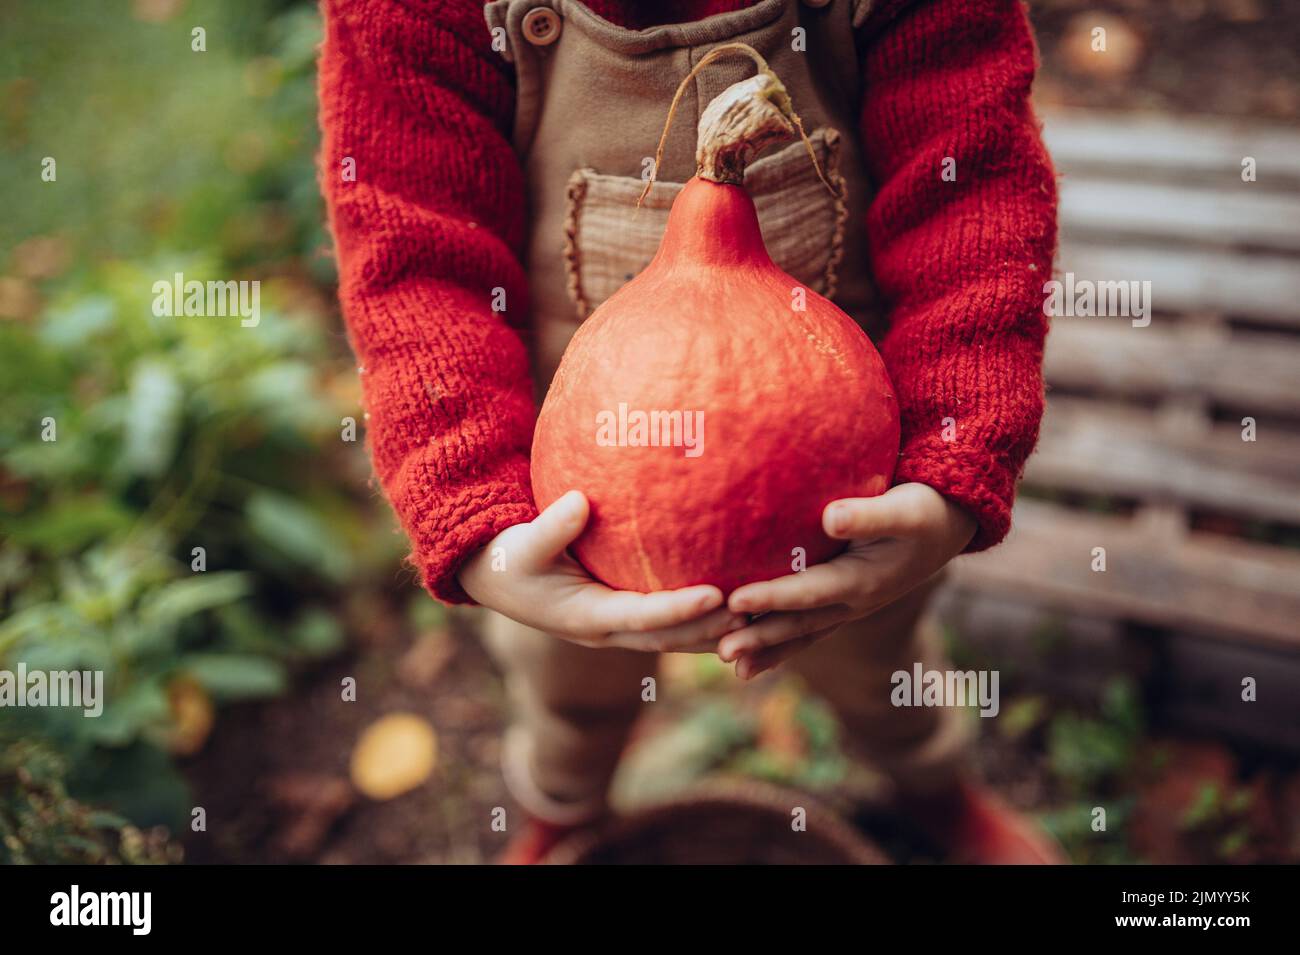 Close-up of little girl in autumn clothes harvesting organic pumpkin in her basket, sustainable lifestyle. Stock Photo